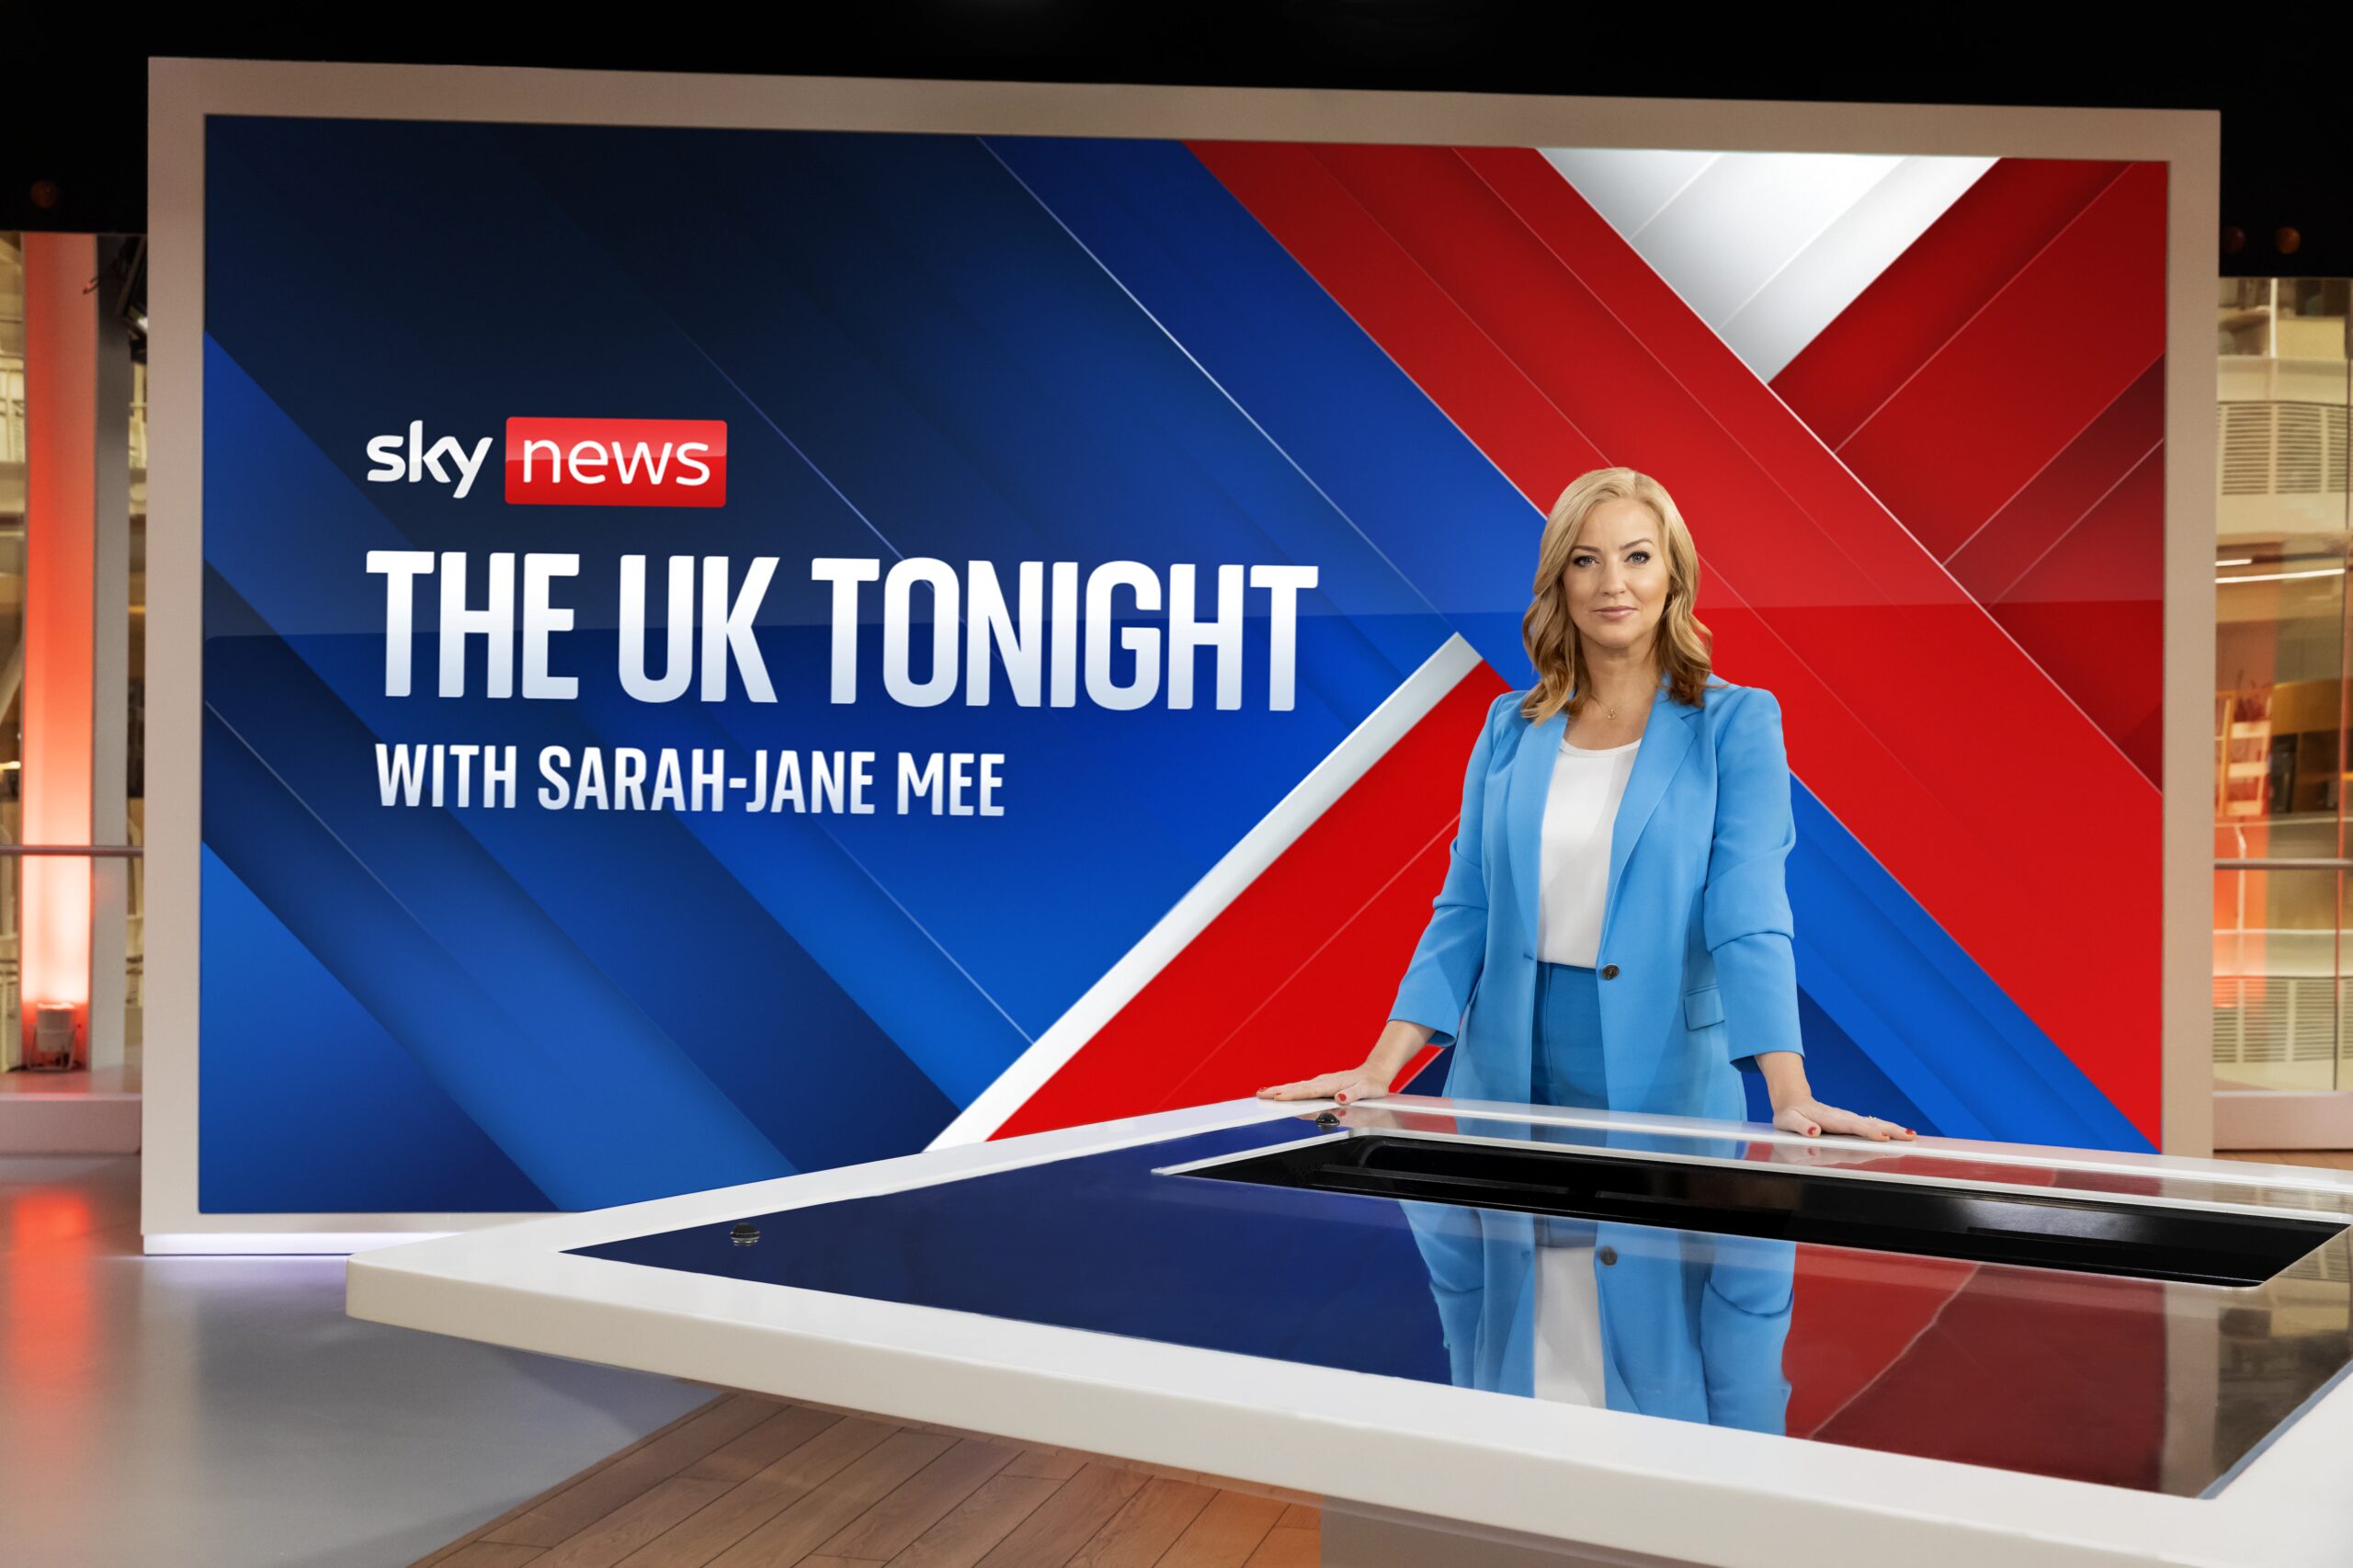 Sky News announces new show - The UK Tonight with Sarah-Jane Mee - Starts Monday 2 October at 8pm